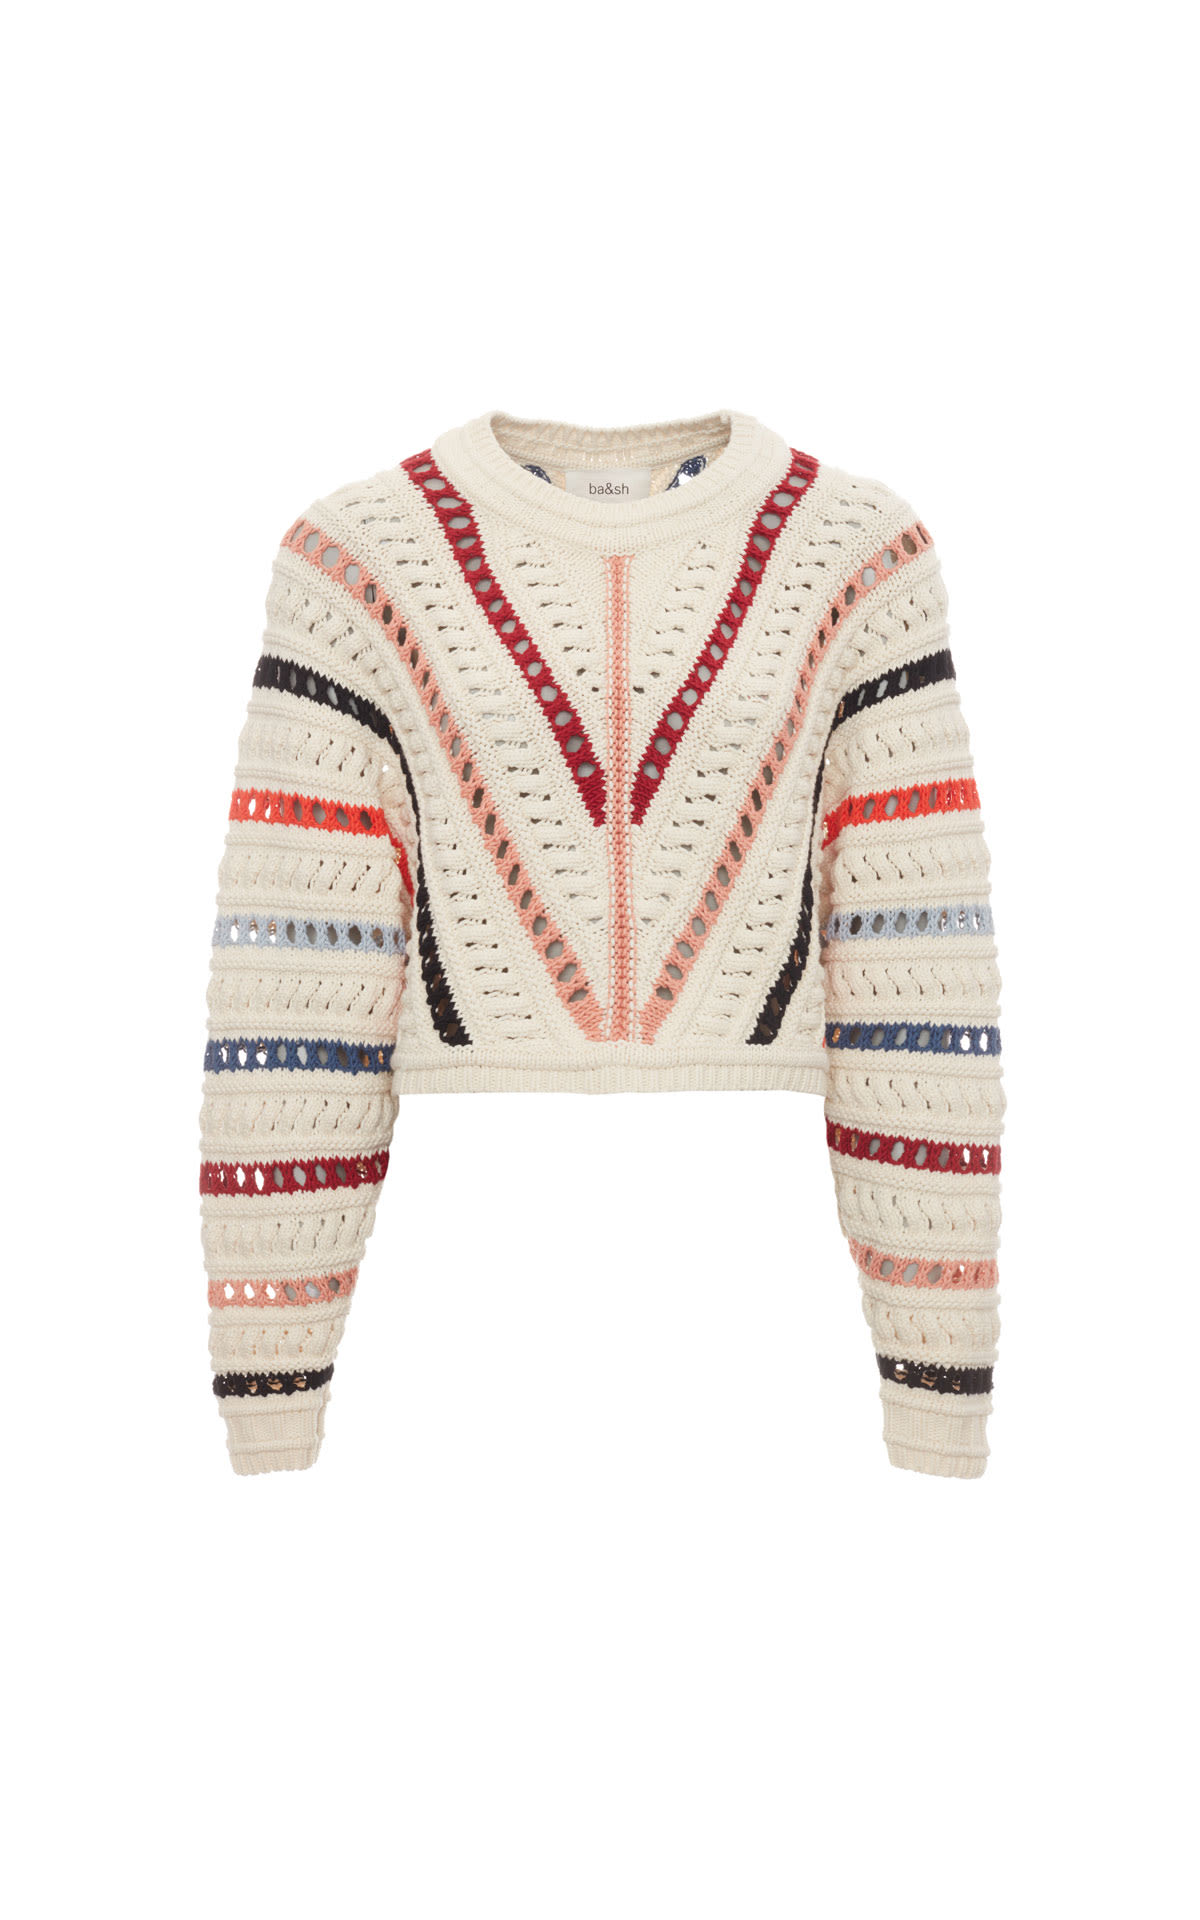 Bash Multicolour sweater from Bicester Village